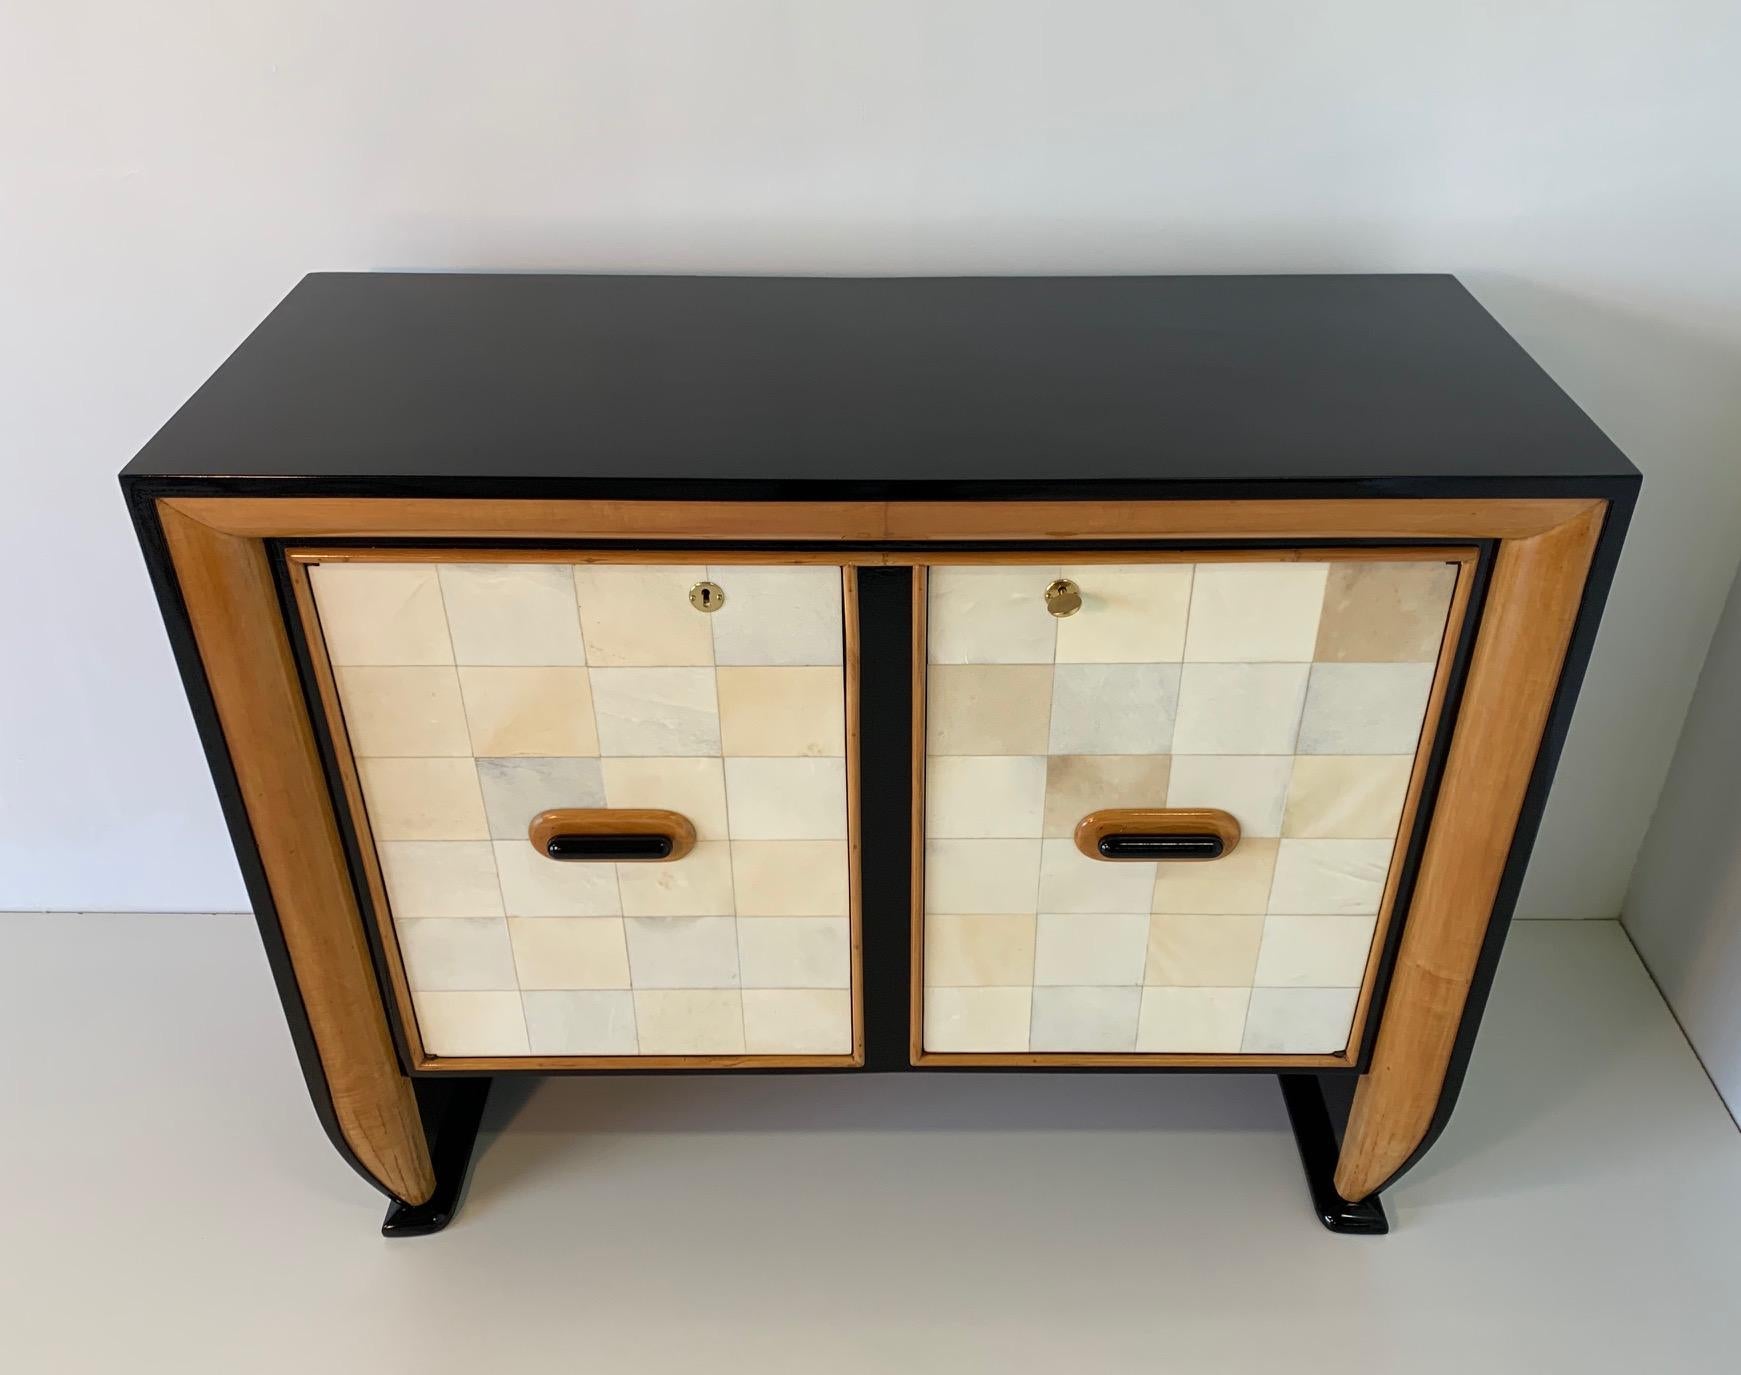 Fine cabinet attributed to Osvaldo Borsani in parchment, maple and black lacquer.
The door handles are in black lacquered and maple wood while interiors are in elegant maple.
Completely restored.
       